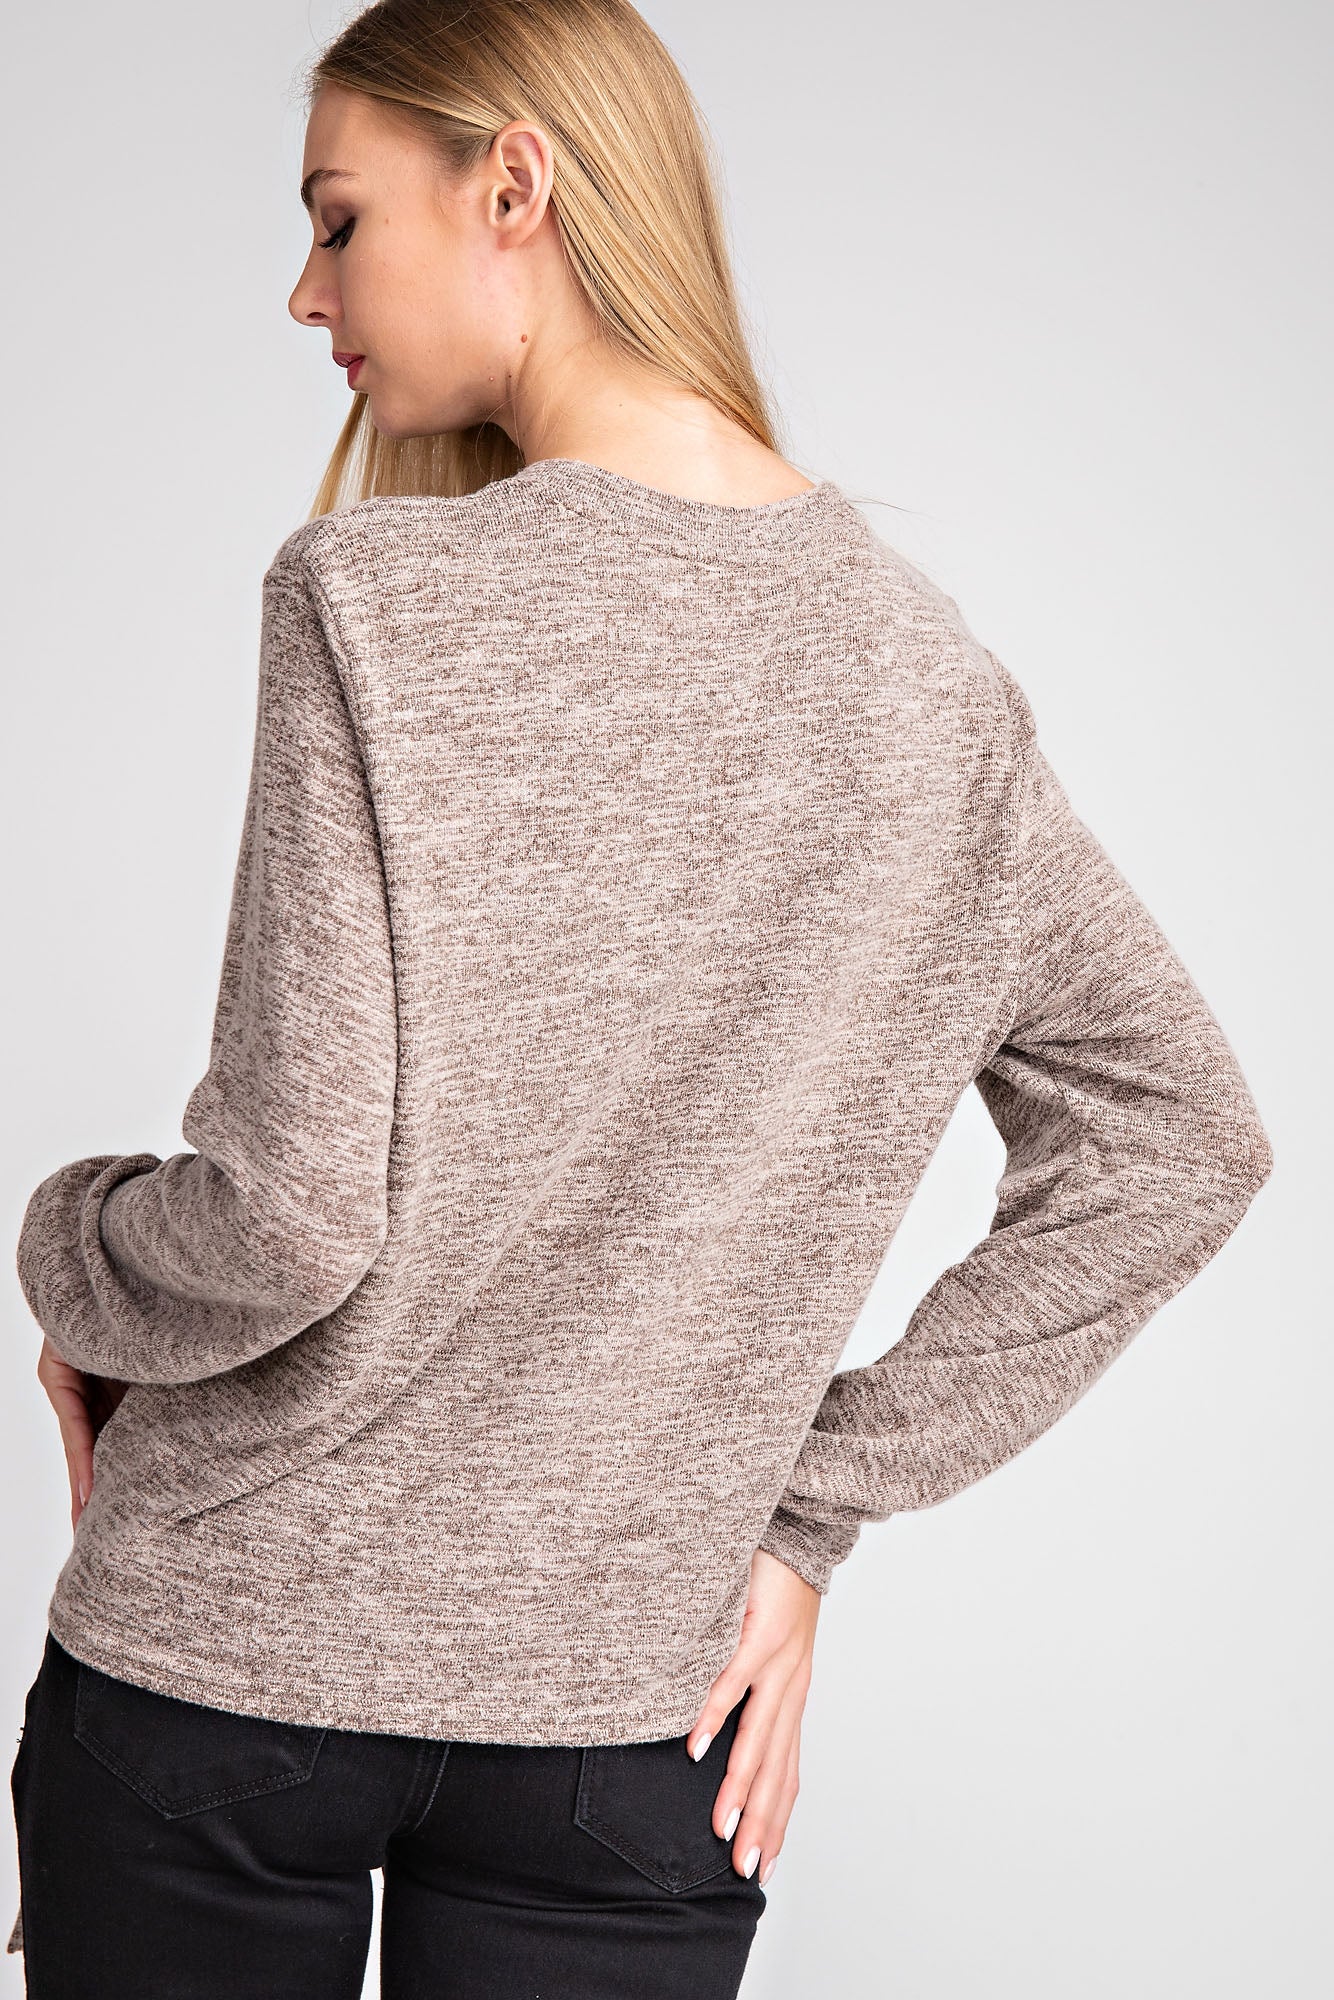 Taupe Tie Front Pullover Top